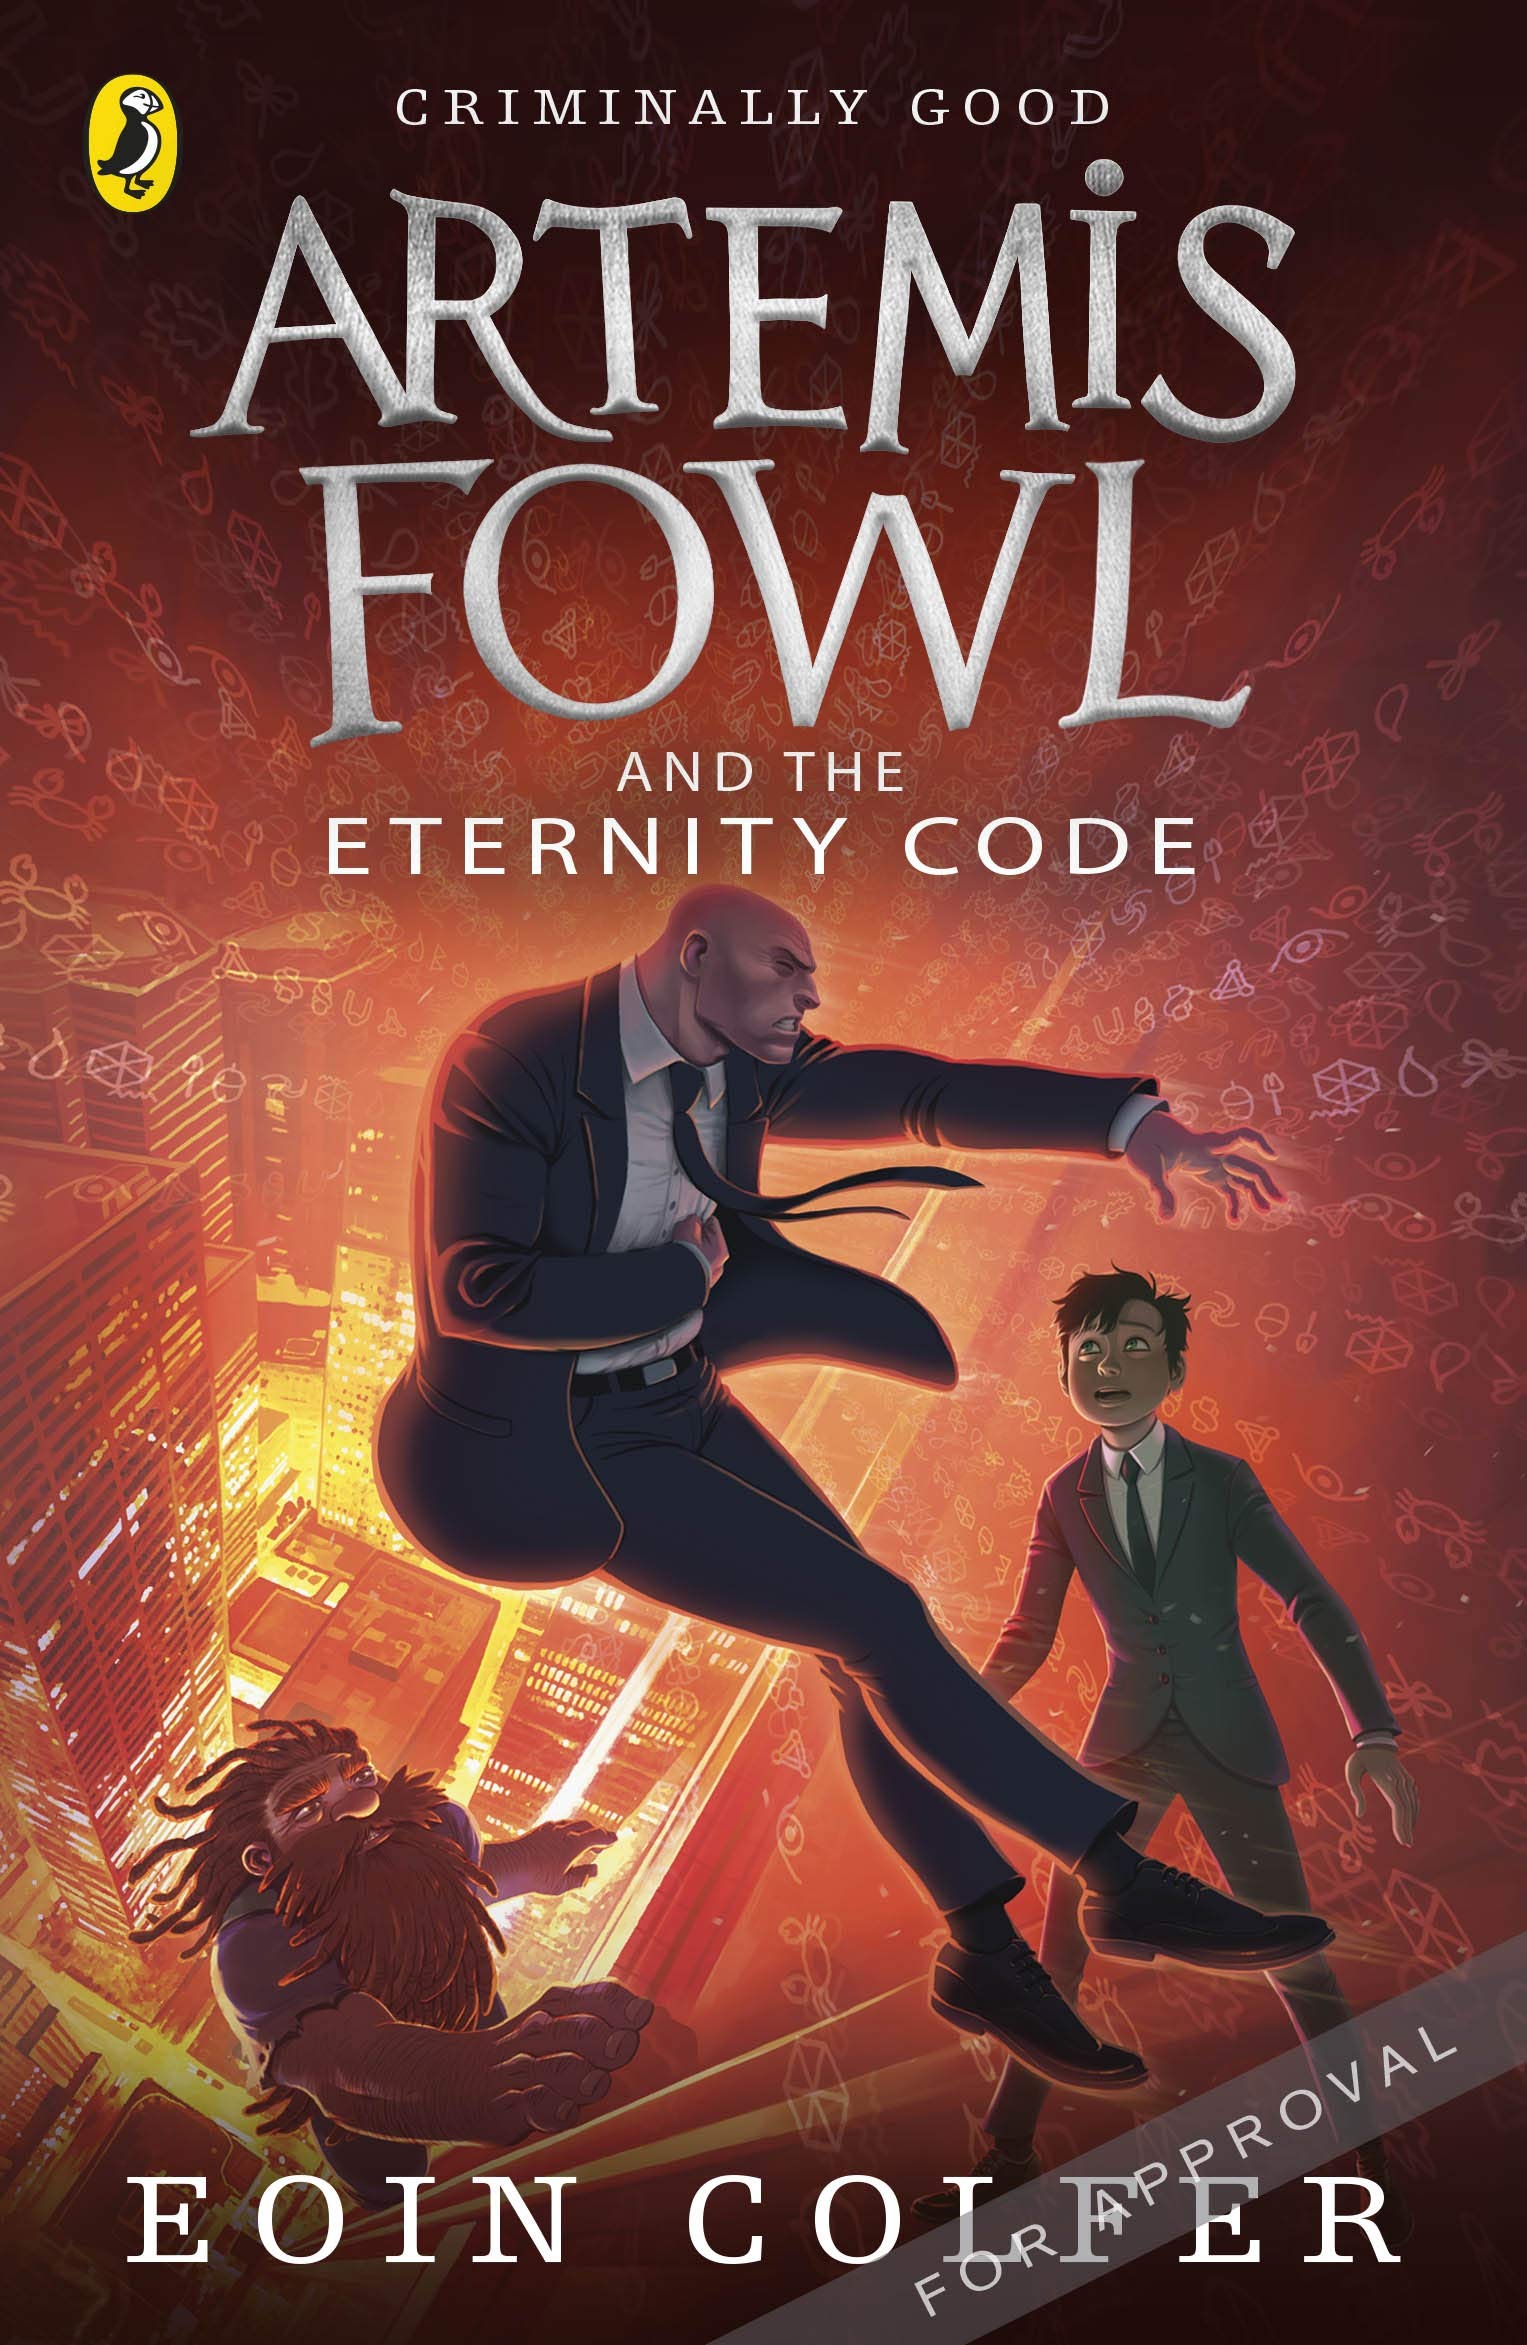 Artemis Fowl and The Eternity Code